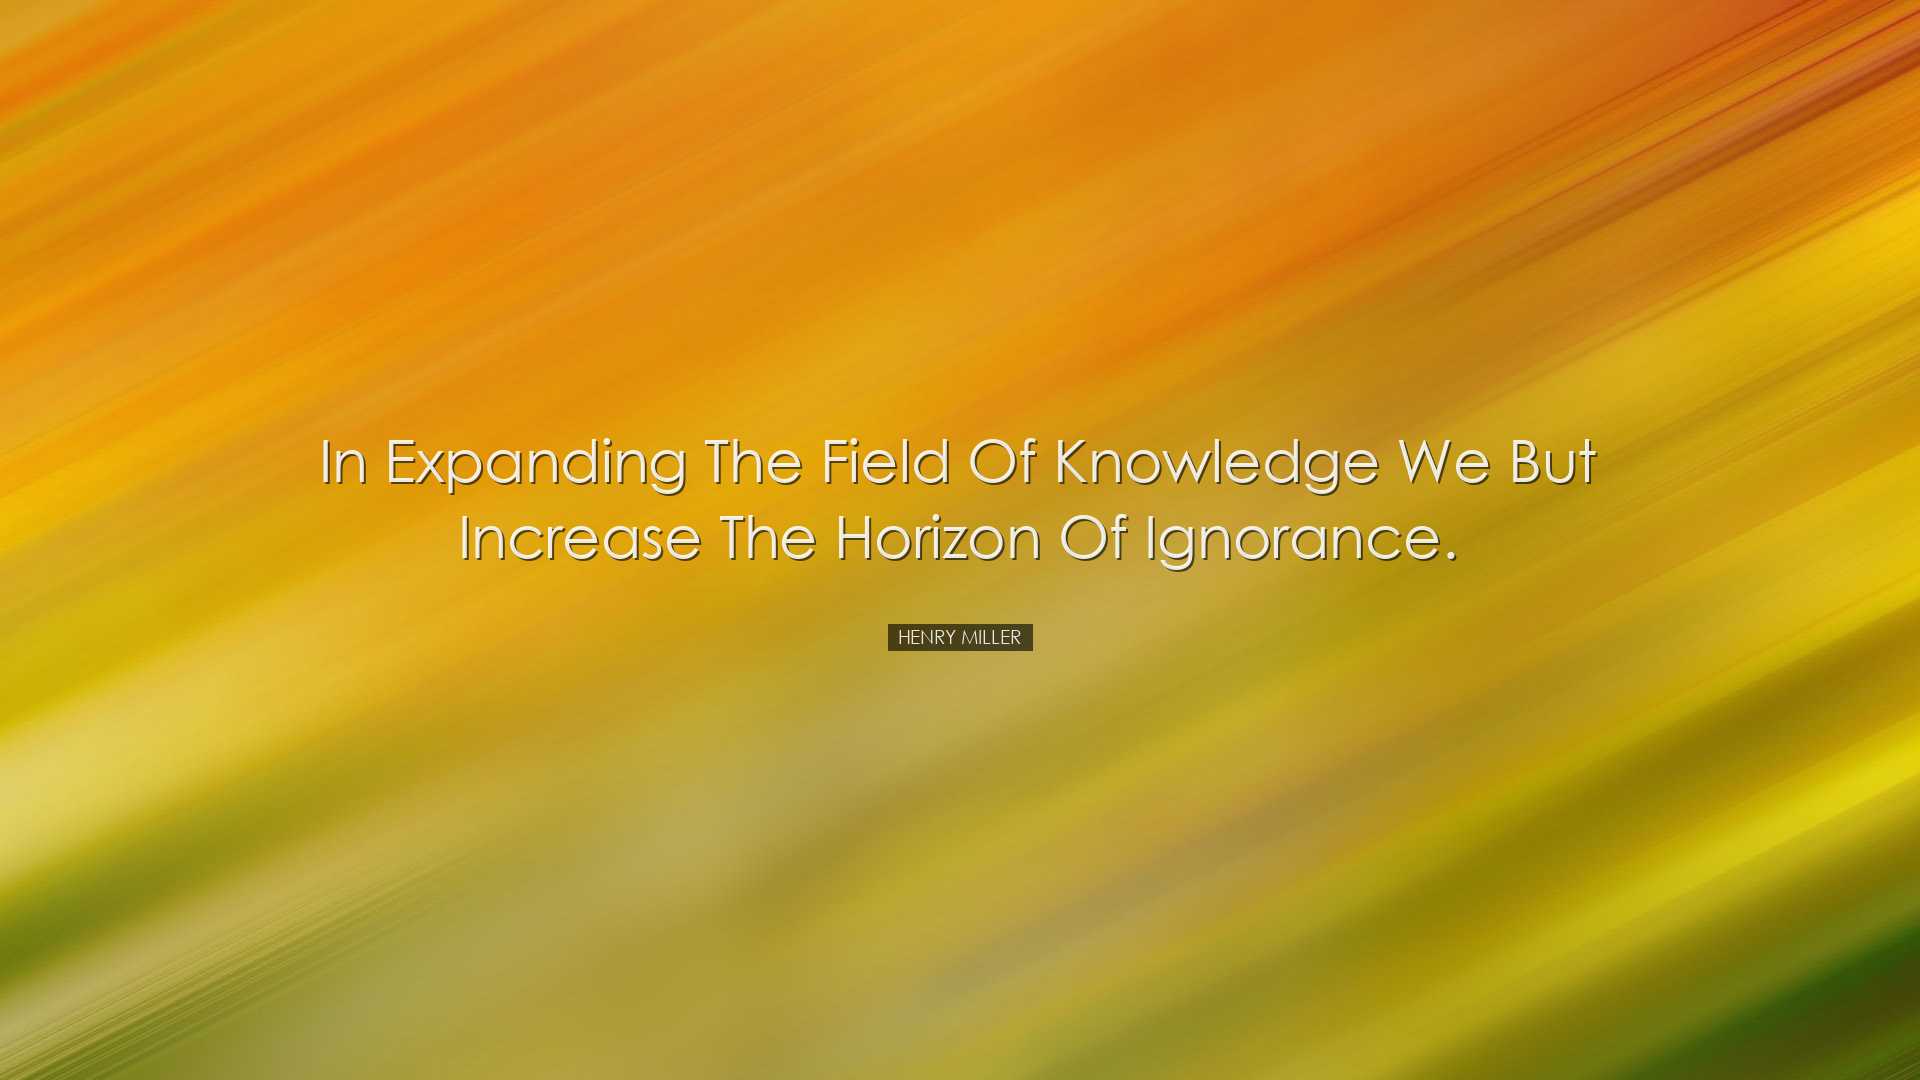 In expanding the field of knowledge we but increase the horizon of